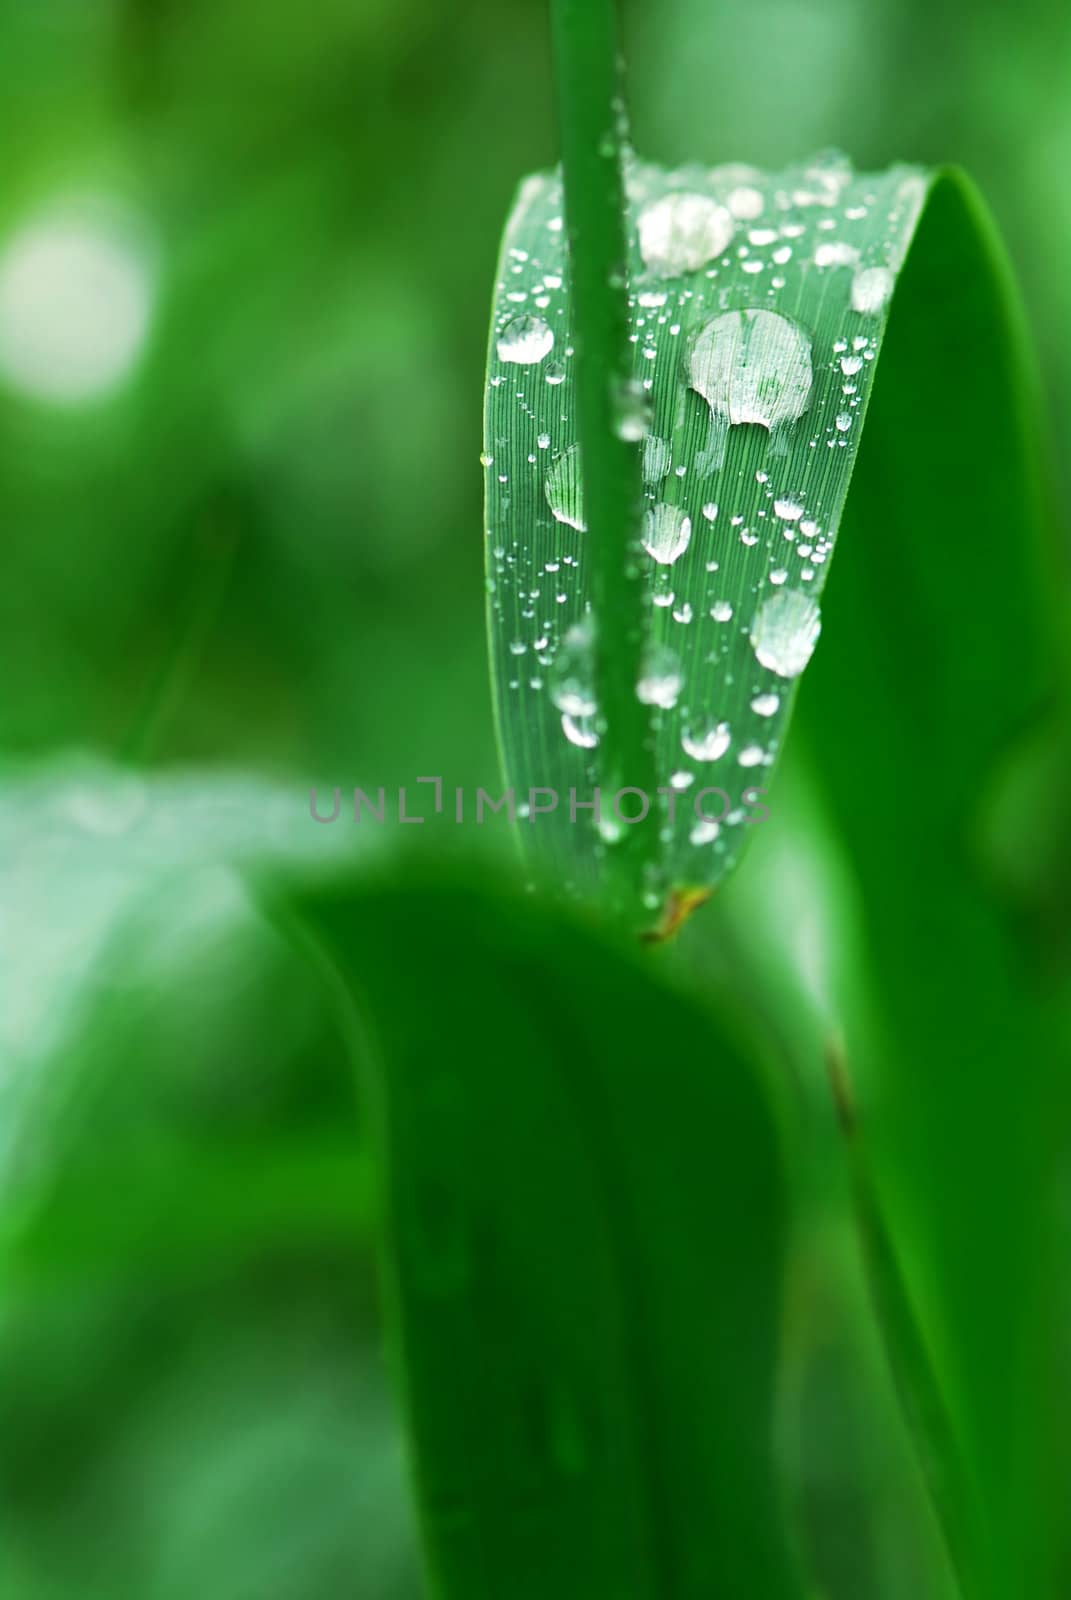 Big water drops on a green grass blade